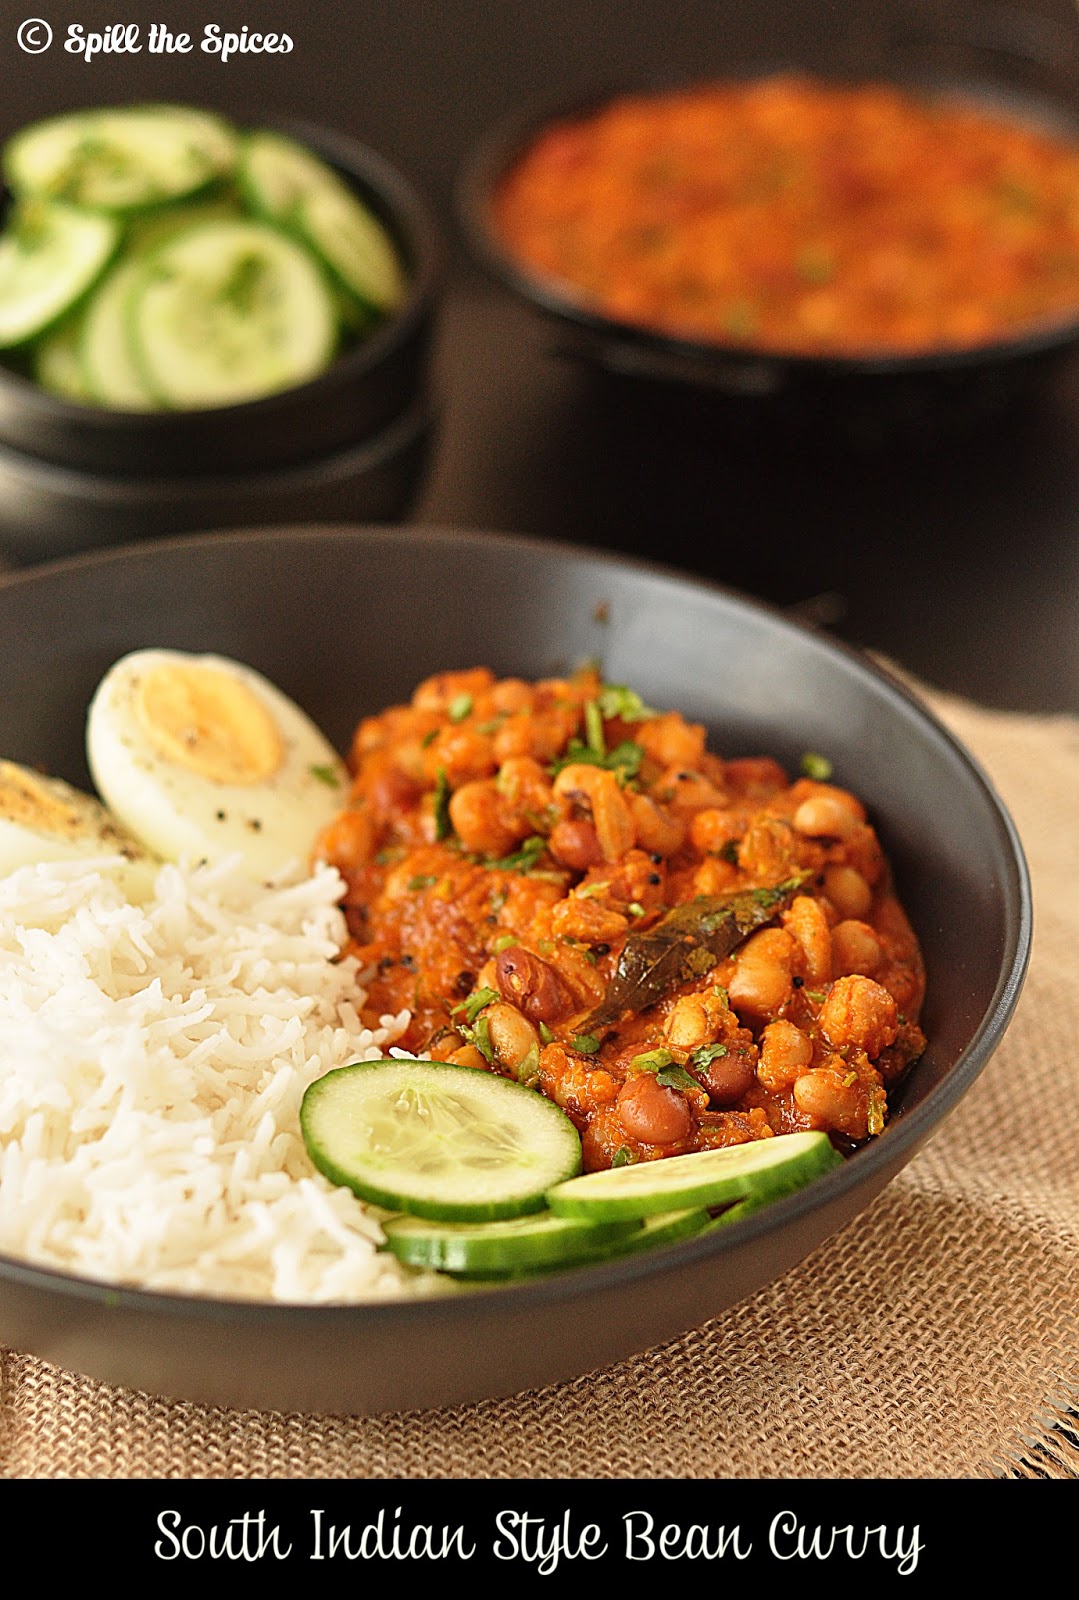 South Indian Style Five Bean Curry | Spill the Spices